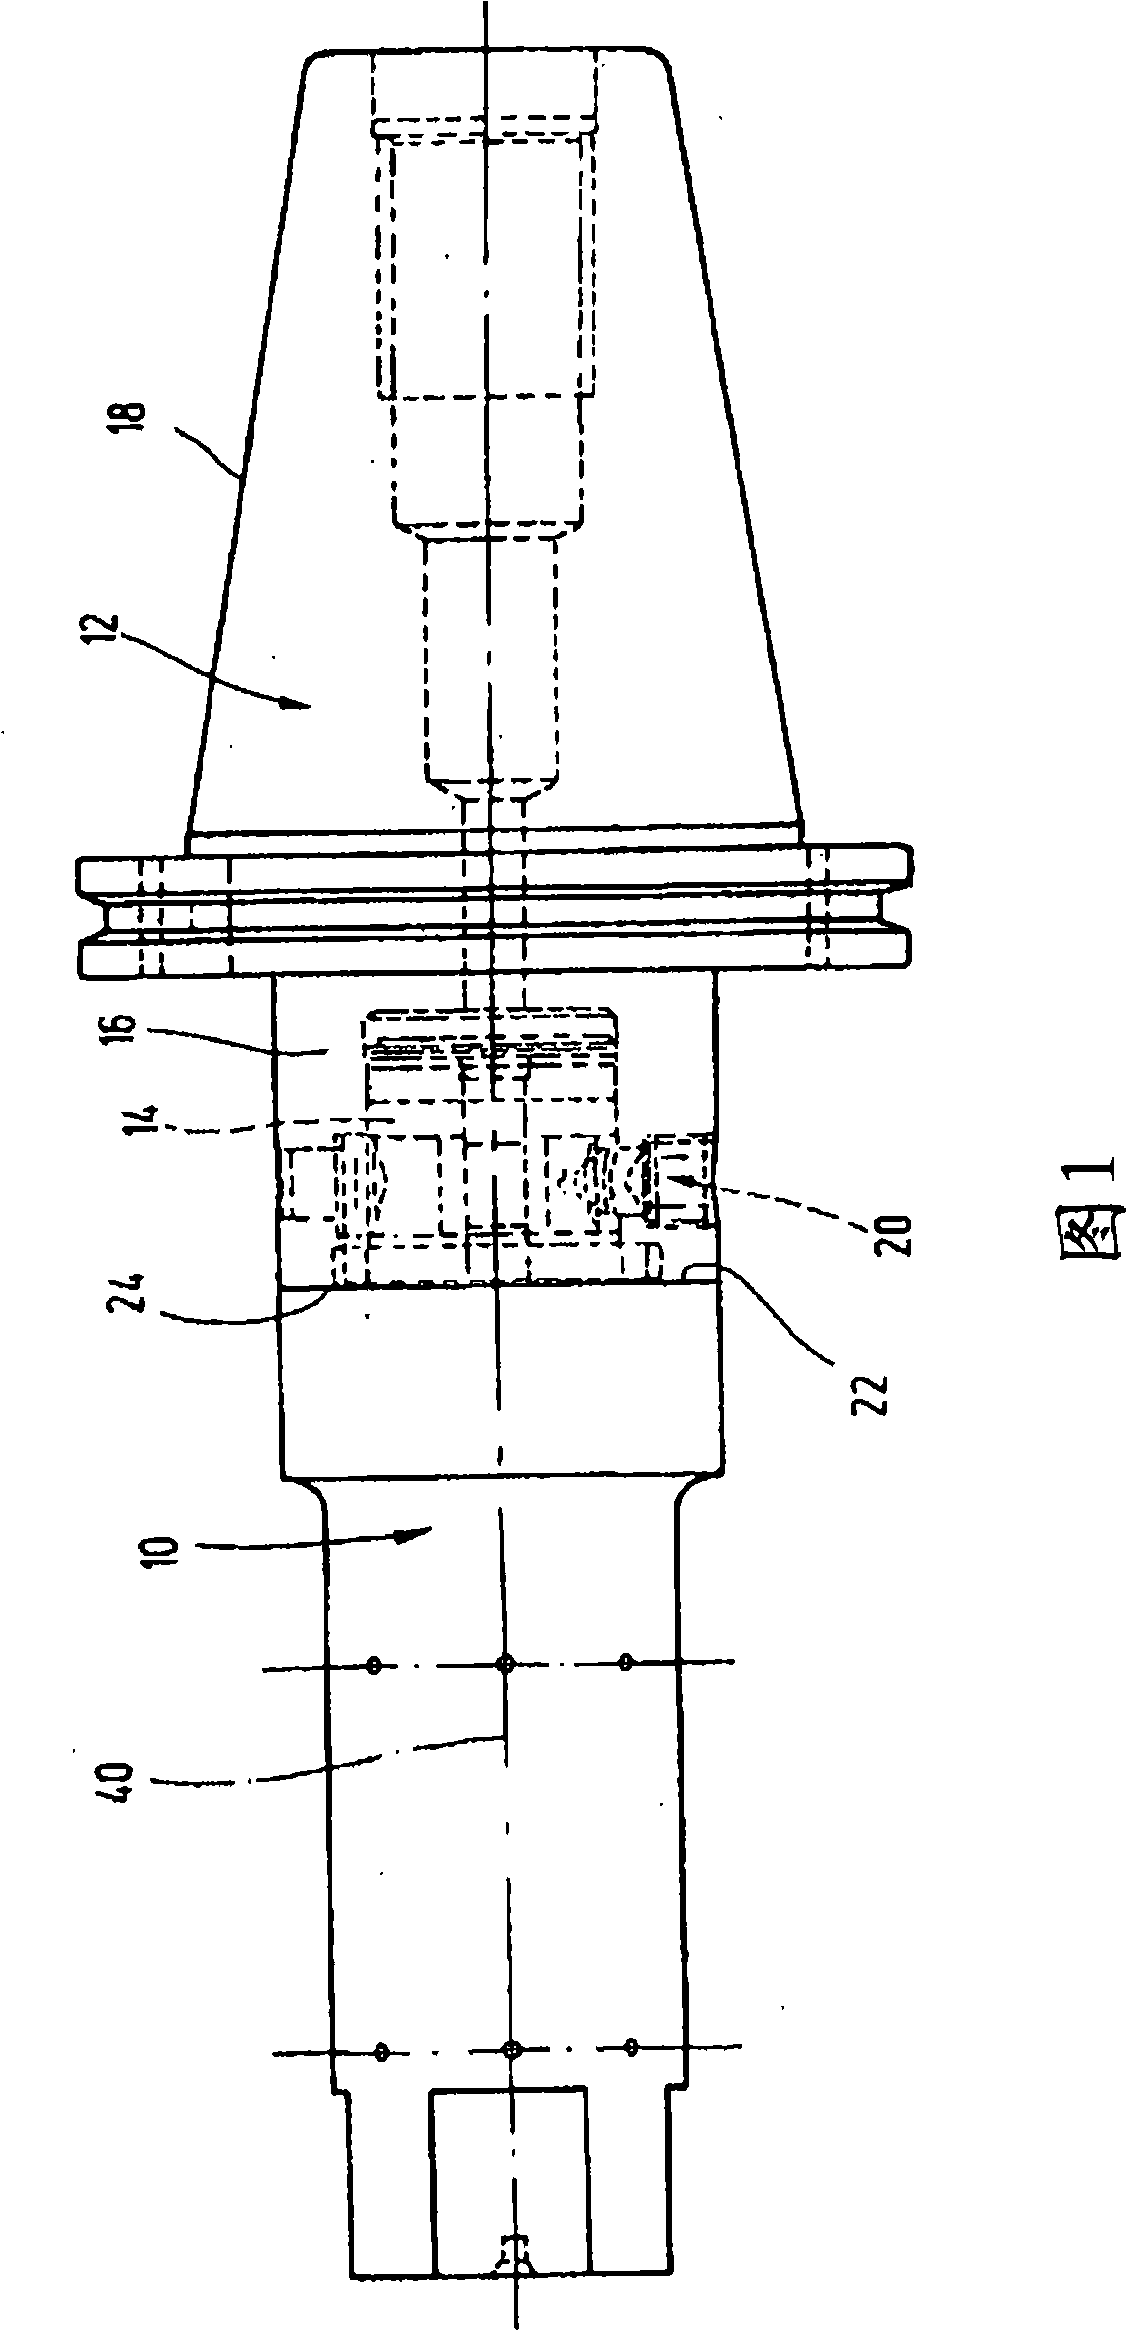 Device for detachably coupling two parts